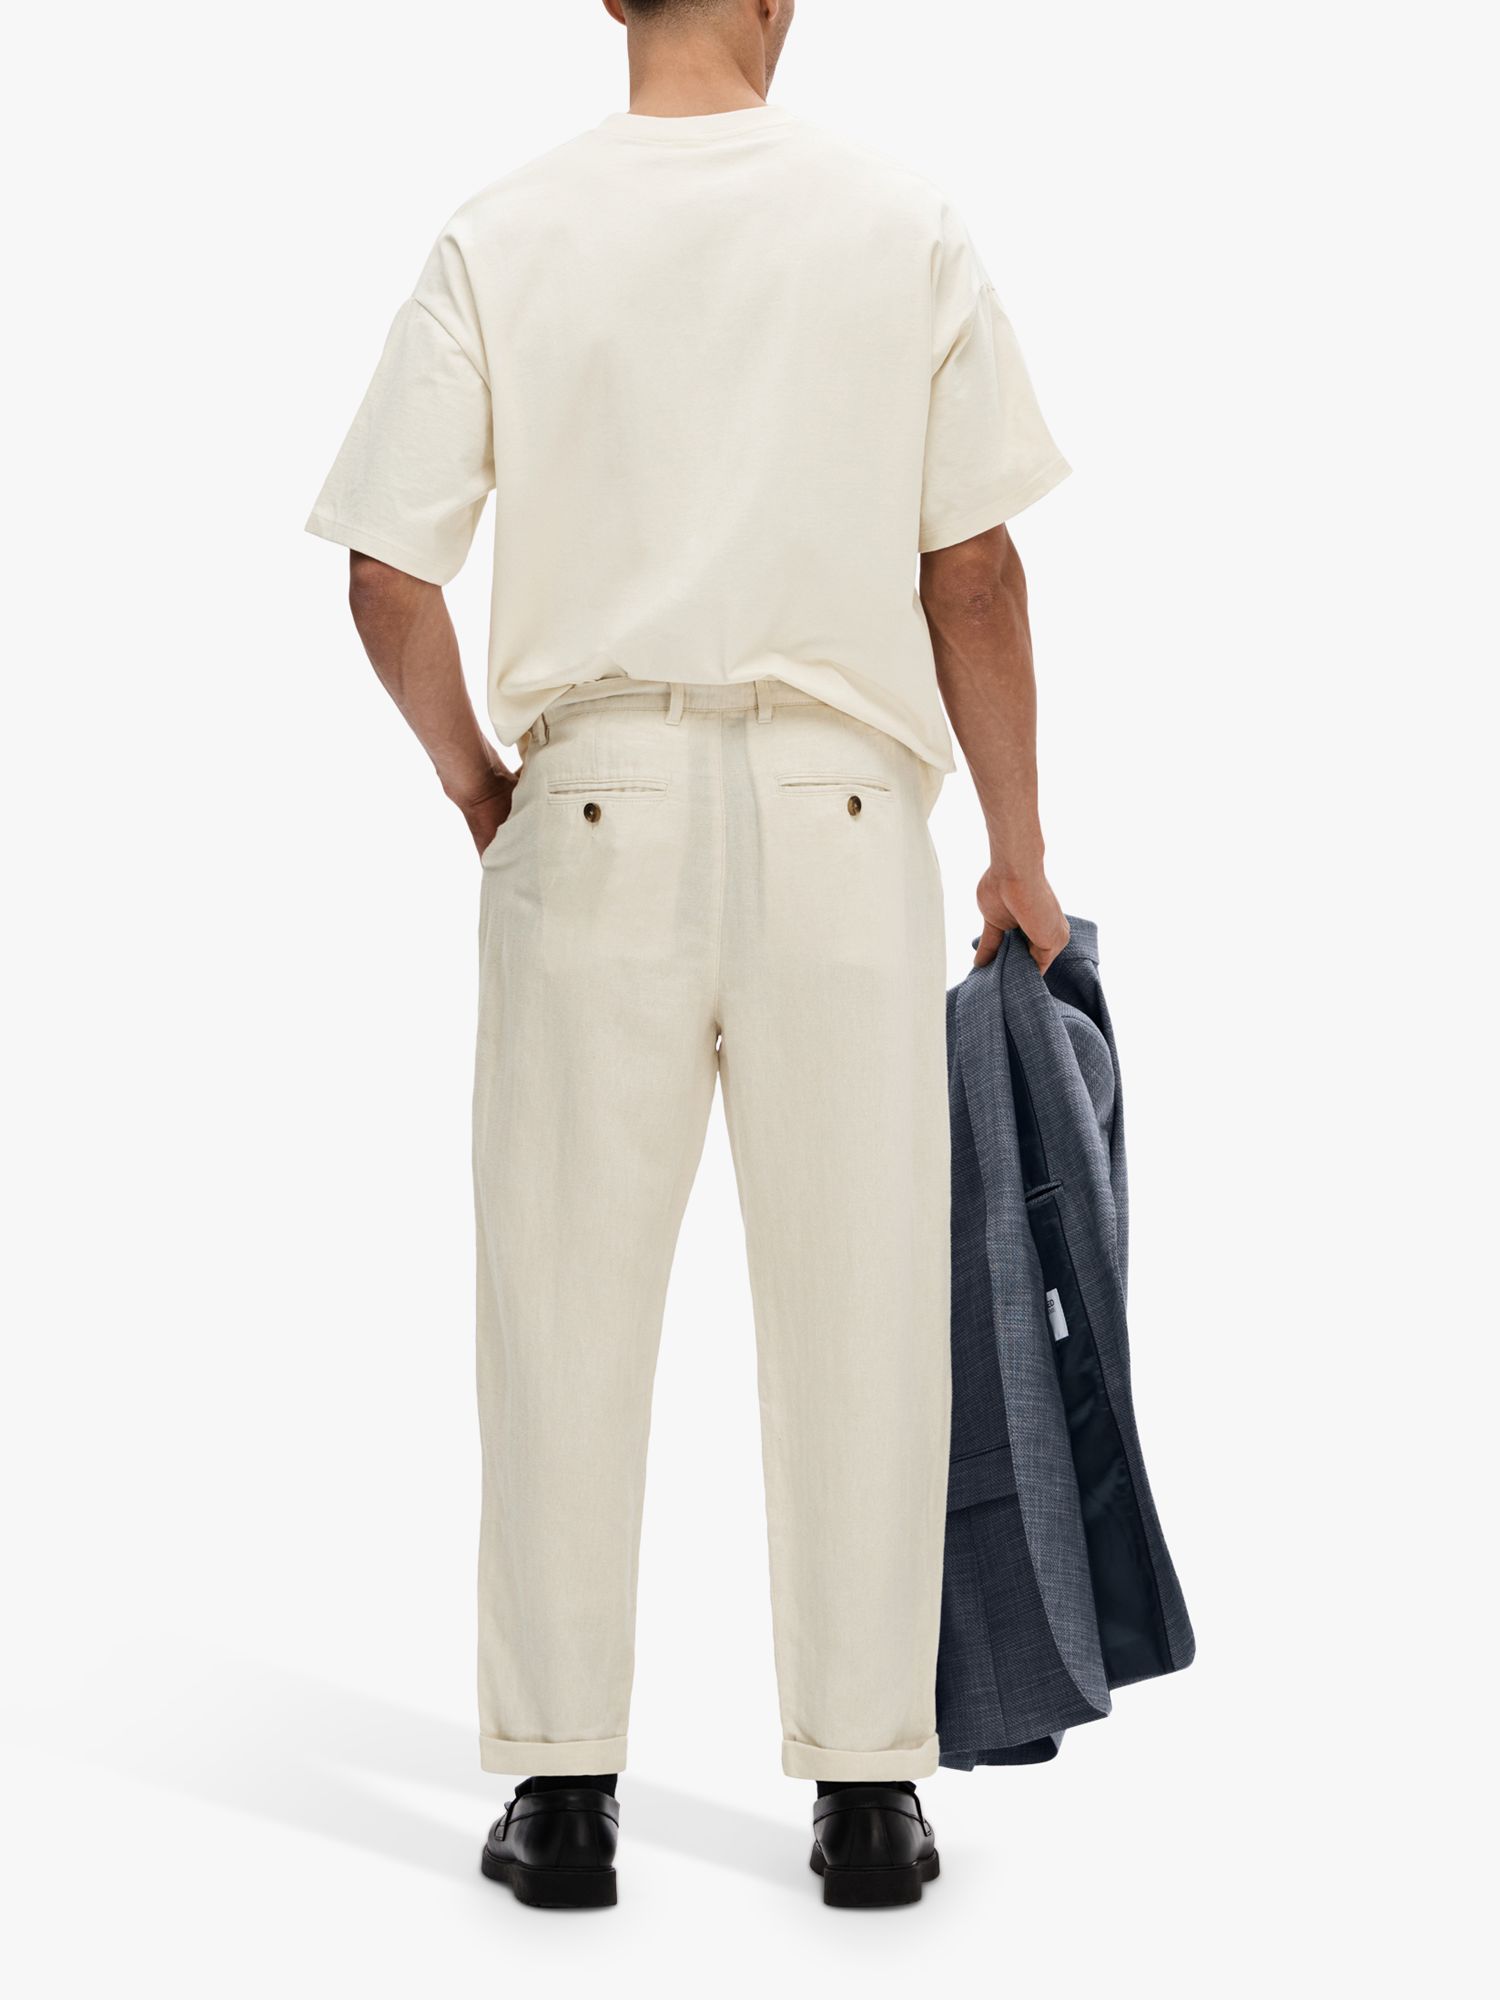 Buy SELECTED HOMME Relaxed Chino Trousers, Oatmeal Online at johnlewis.com